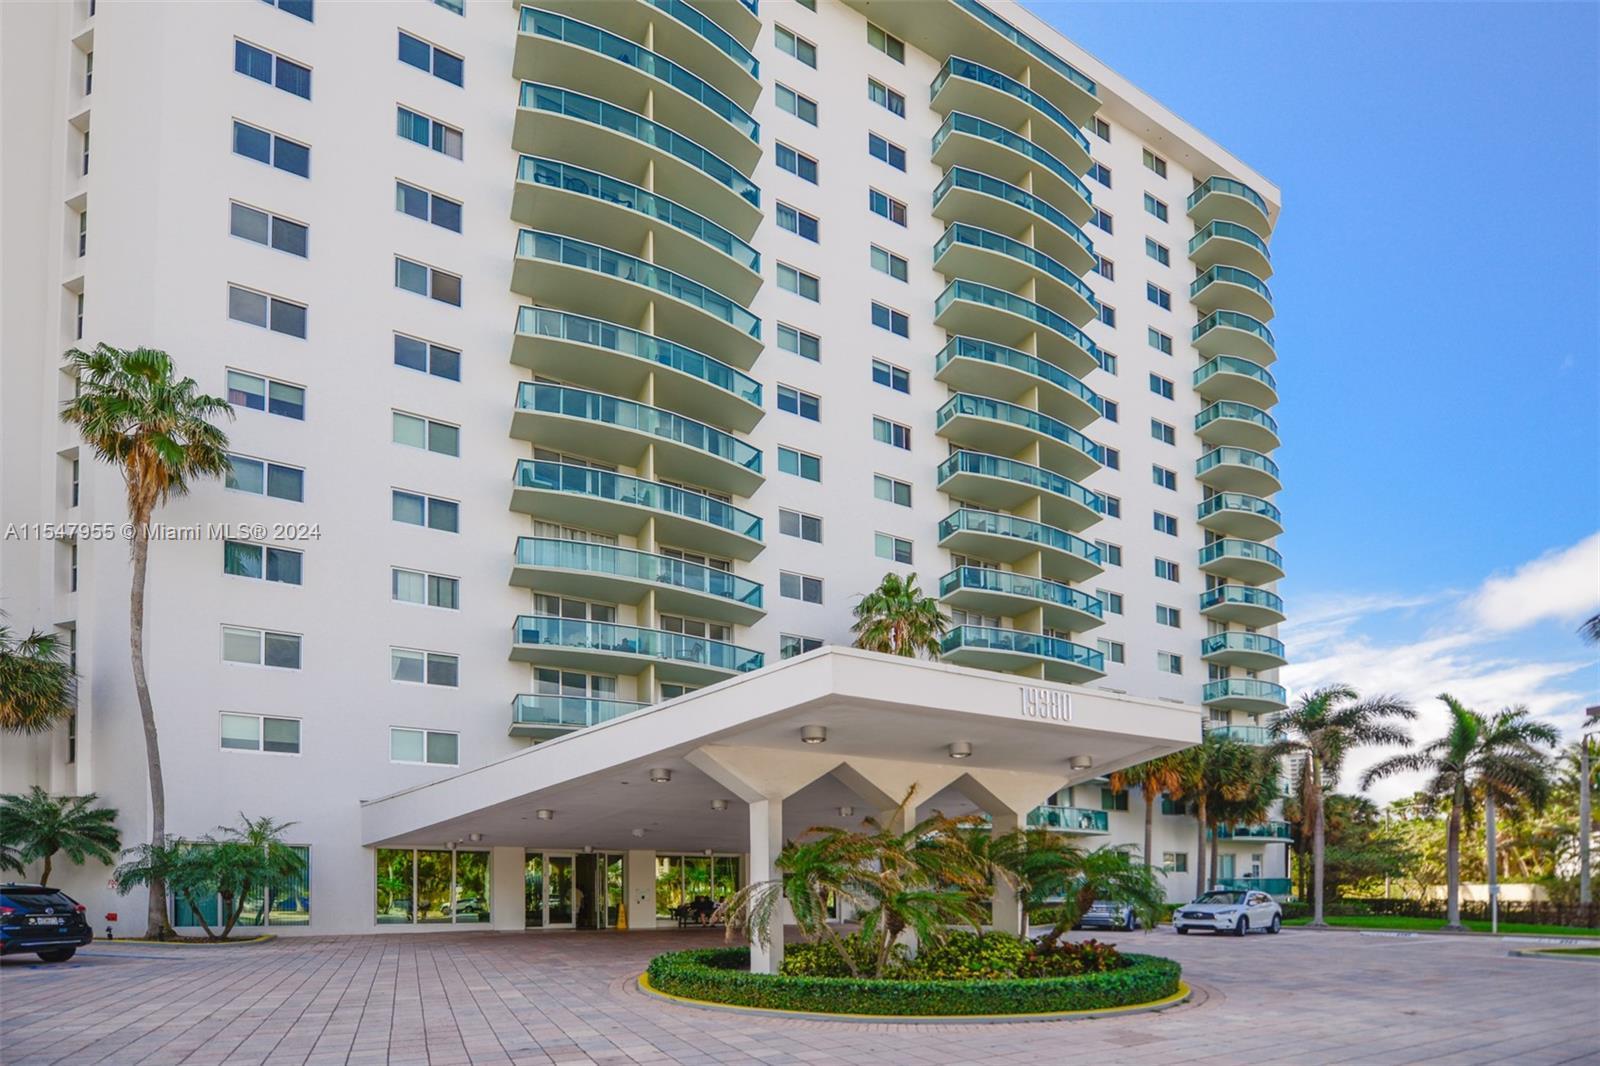 Photo of 19380 Collins Ave #501 in Sunny Isles Beach, FL